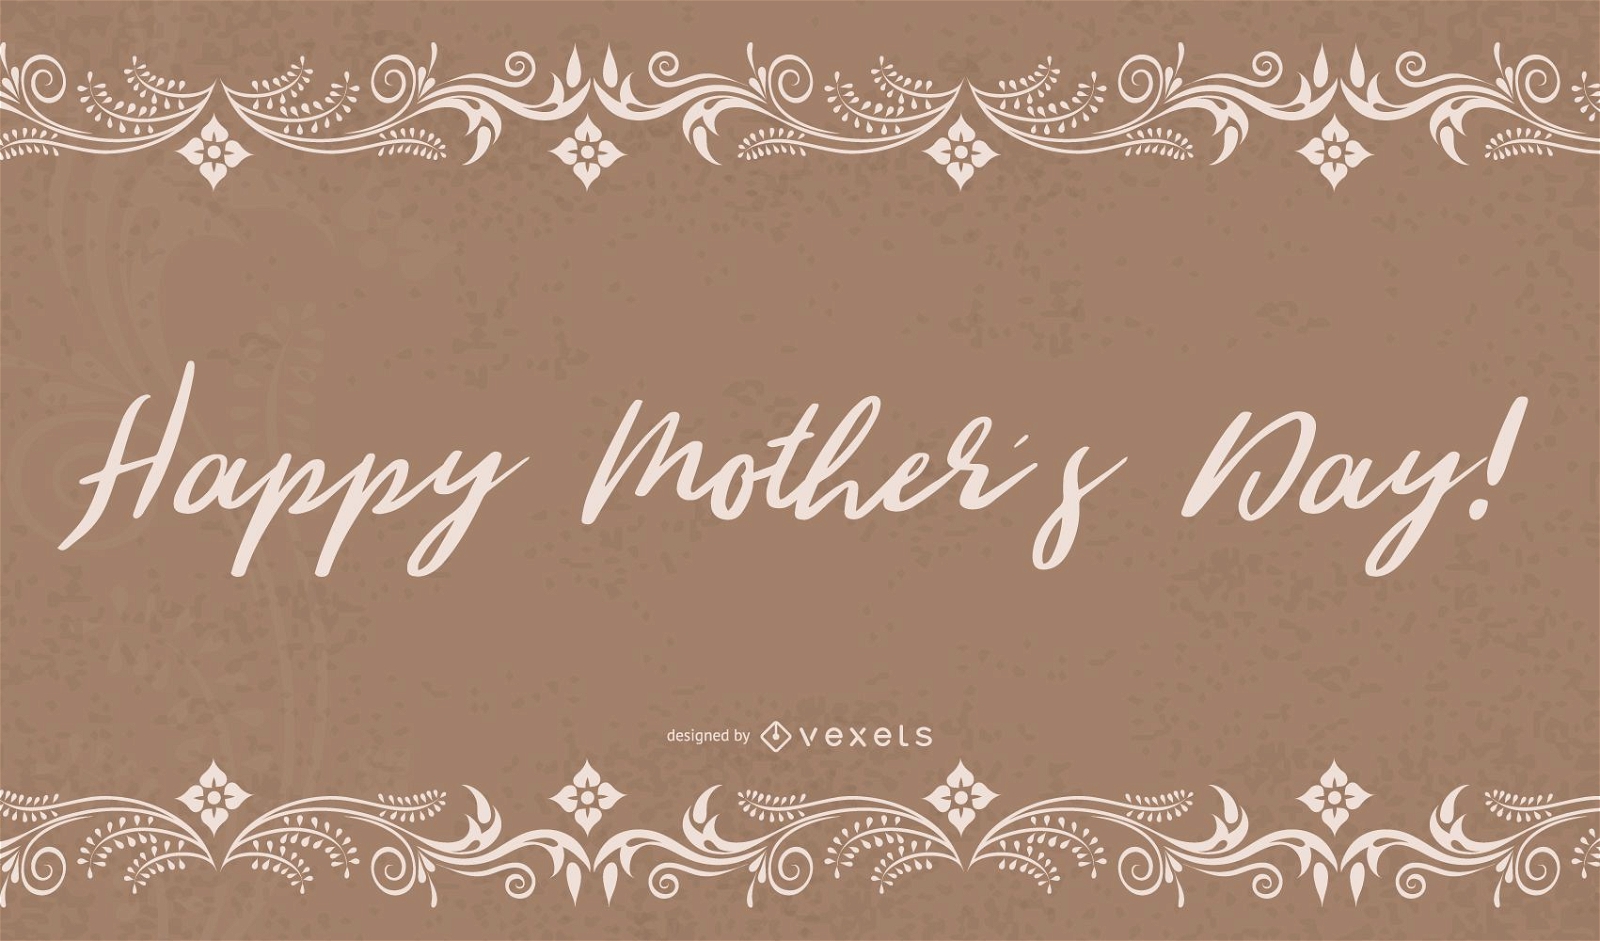 Floral Grunge Mothers Day Card